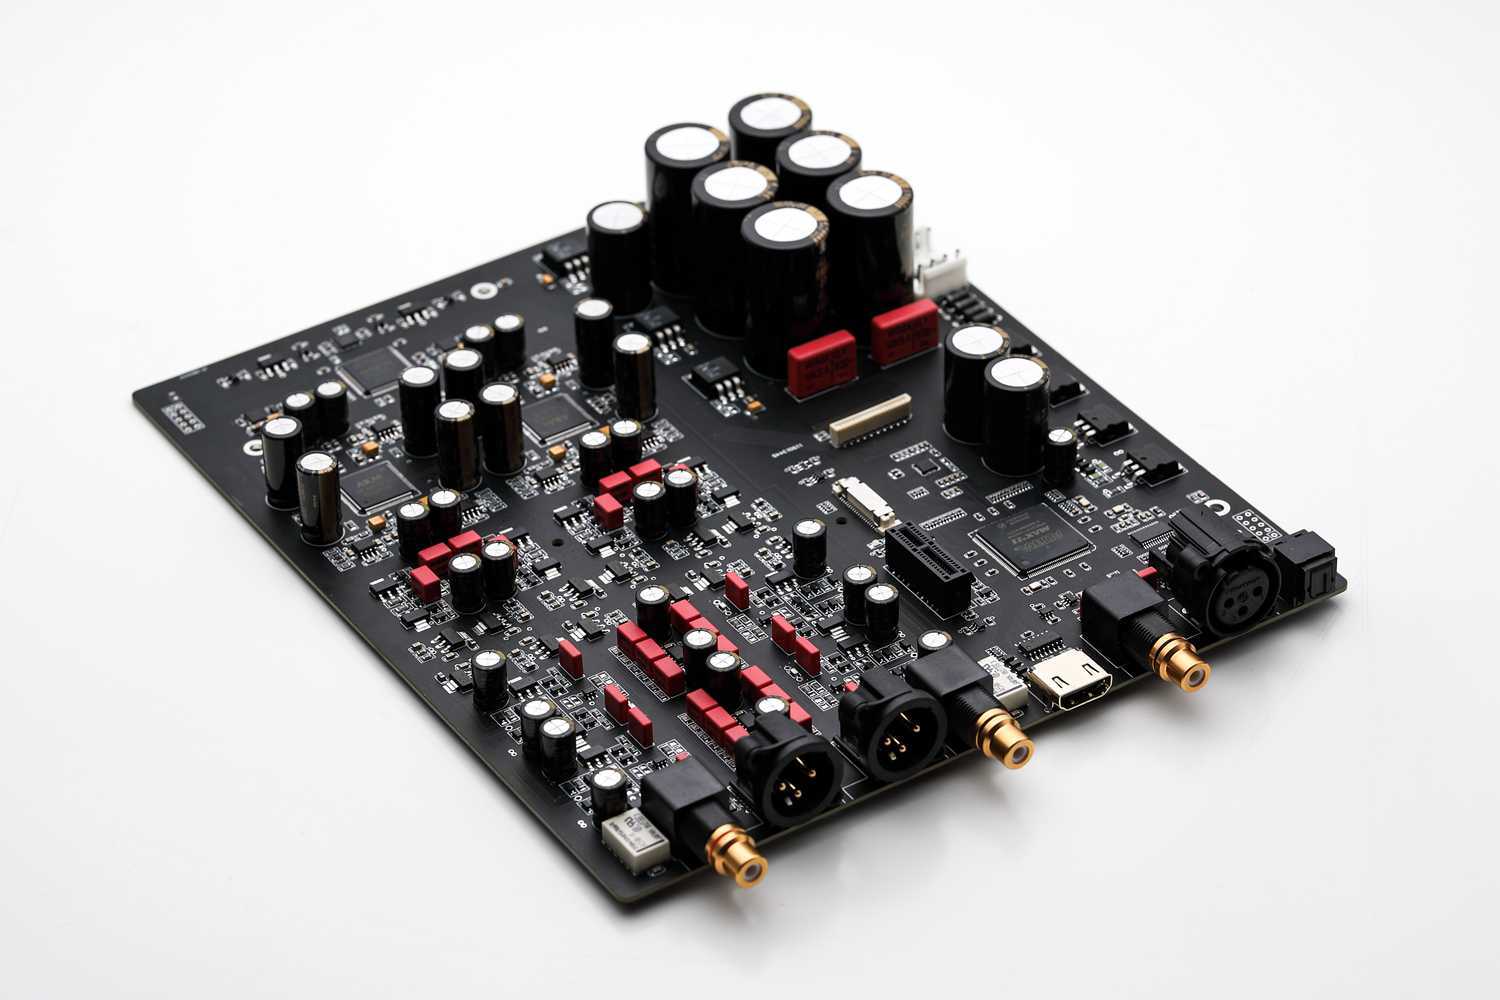 Gustard x16 dac review | hifinext - audio buyer's guide